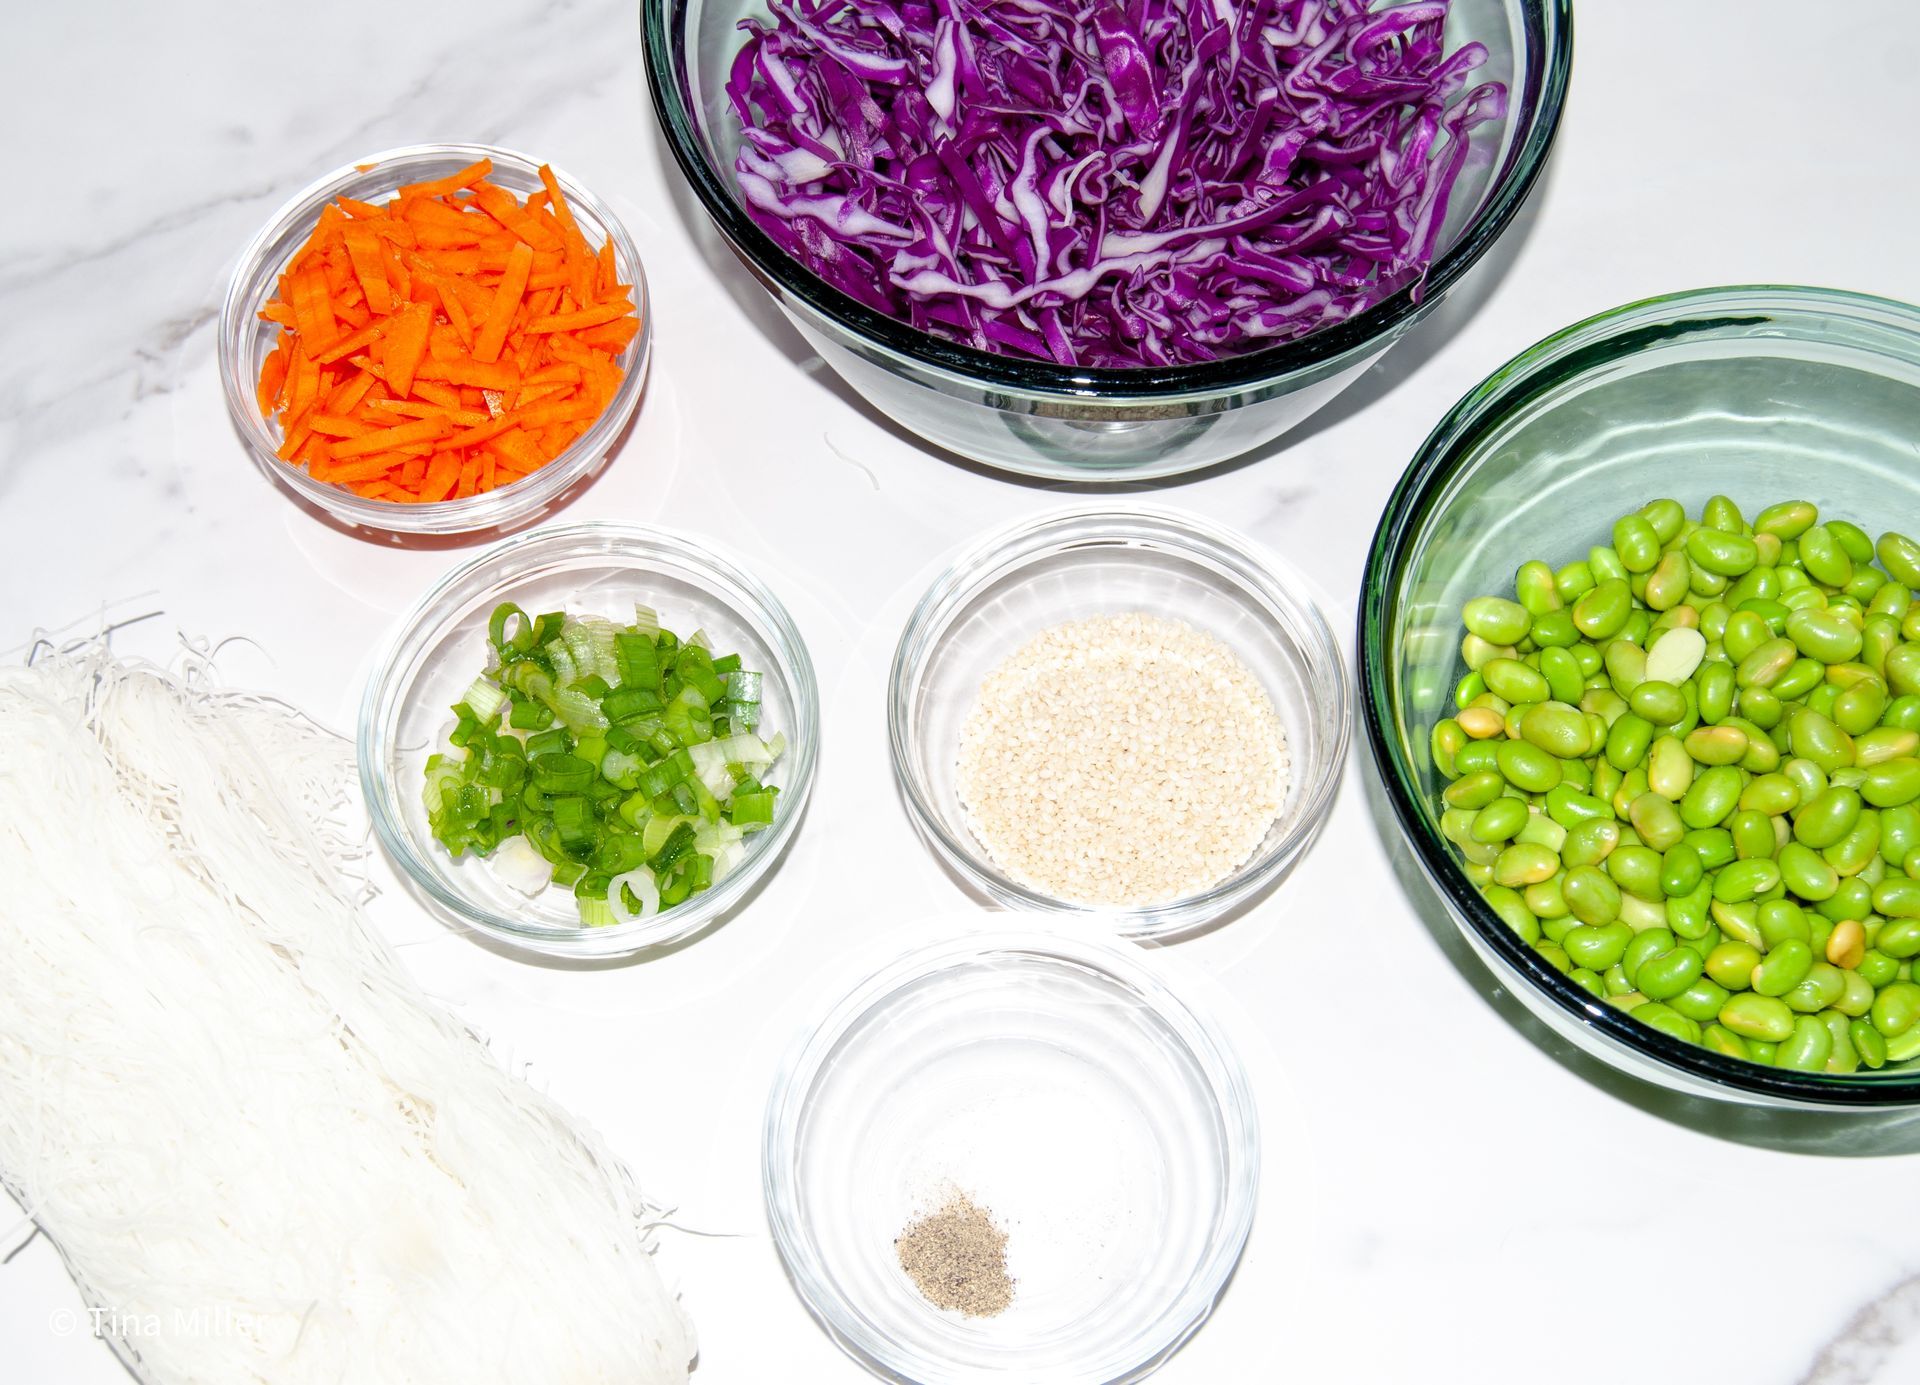 ingredients in glass bowls; Carrot, Red cabbage, Vermicelli on the couter top, Green onion, Sesame seeds, Shelled edamame, Salt and pepper